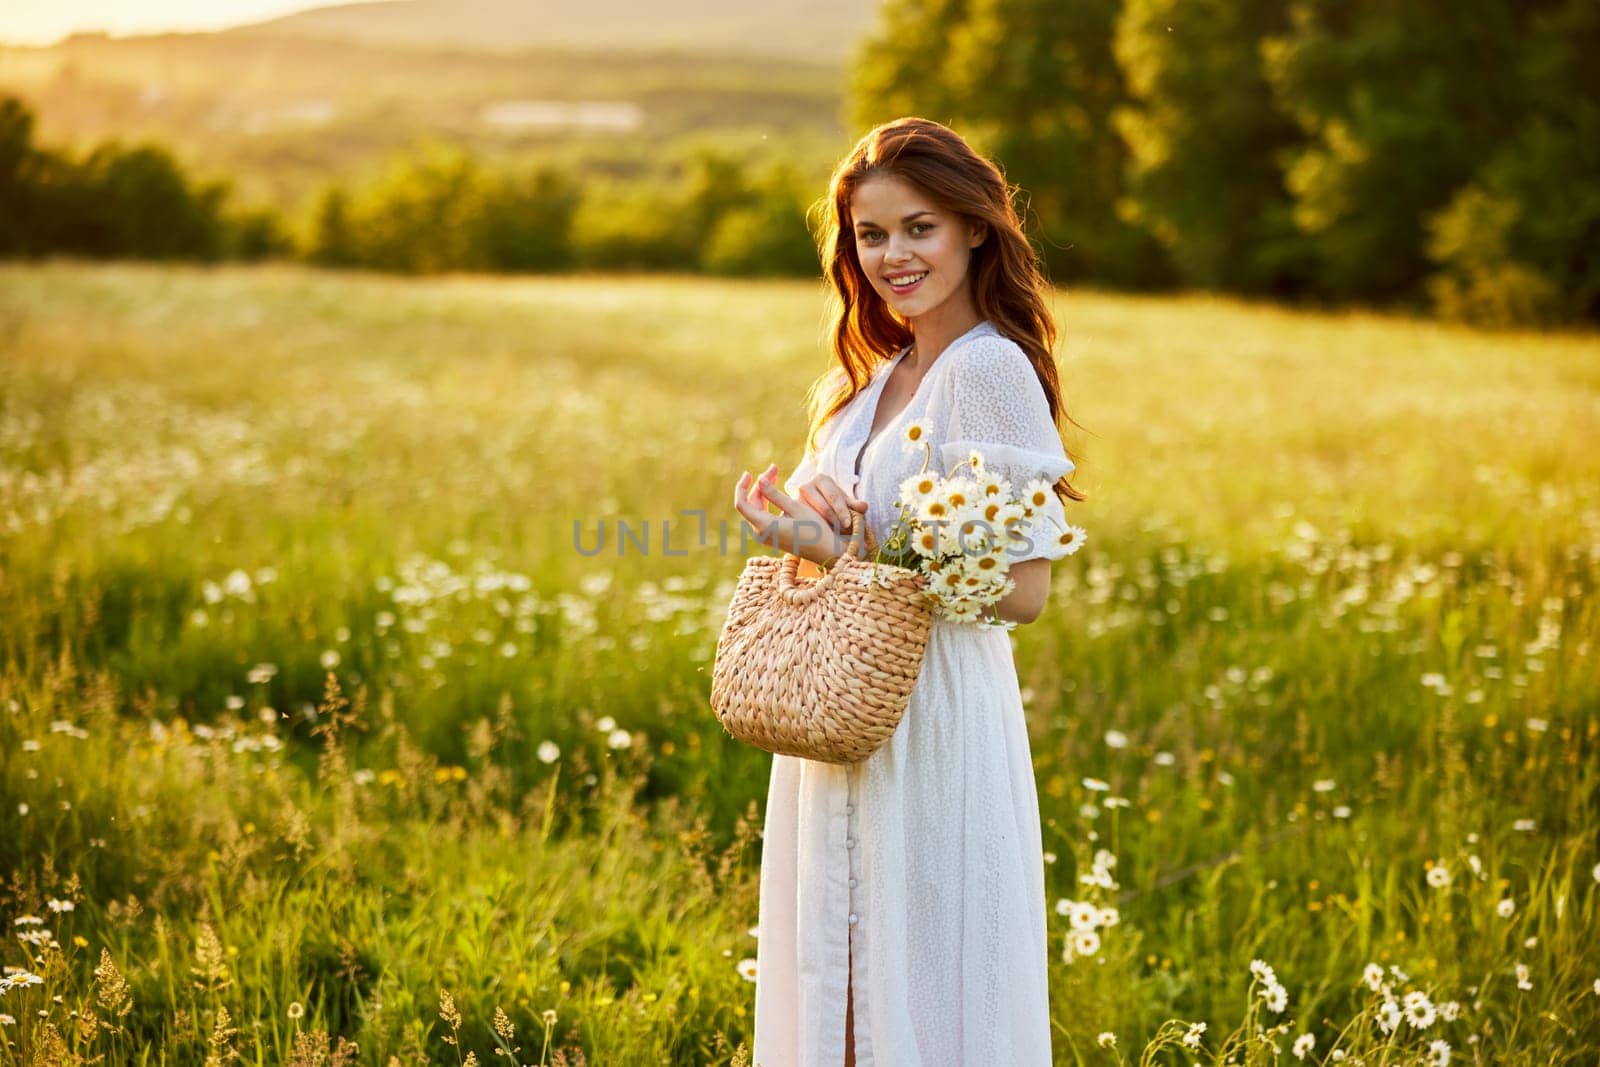 a beautiful woman in a light dress and a basket of daisies in her hands stands in a field during sunset and smiles at the camera. High quality photo